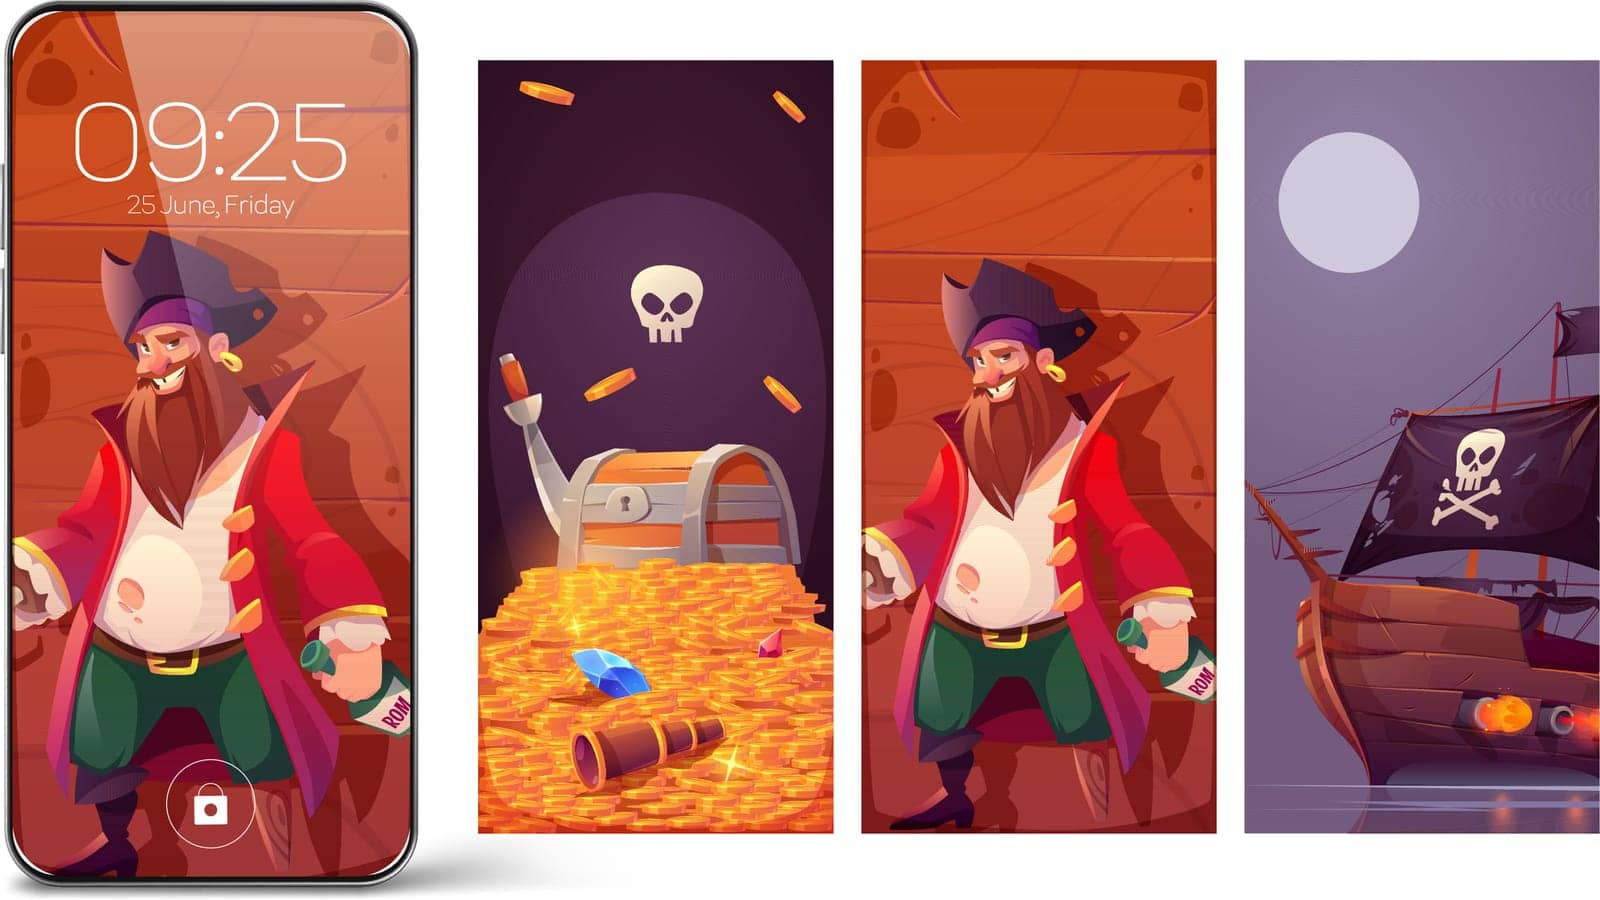 Pirate theme for smartphone screensaver by upklyak